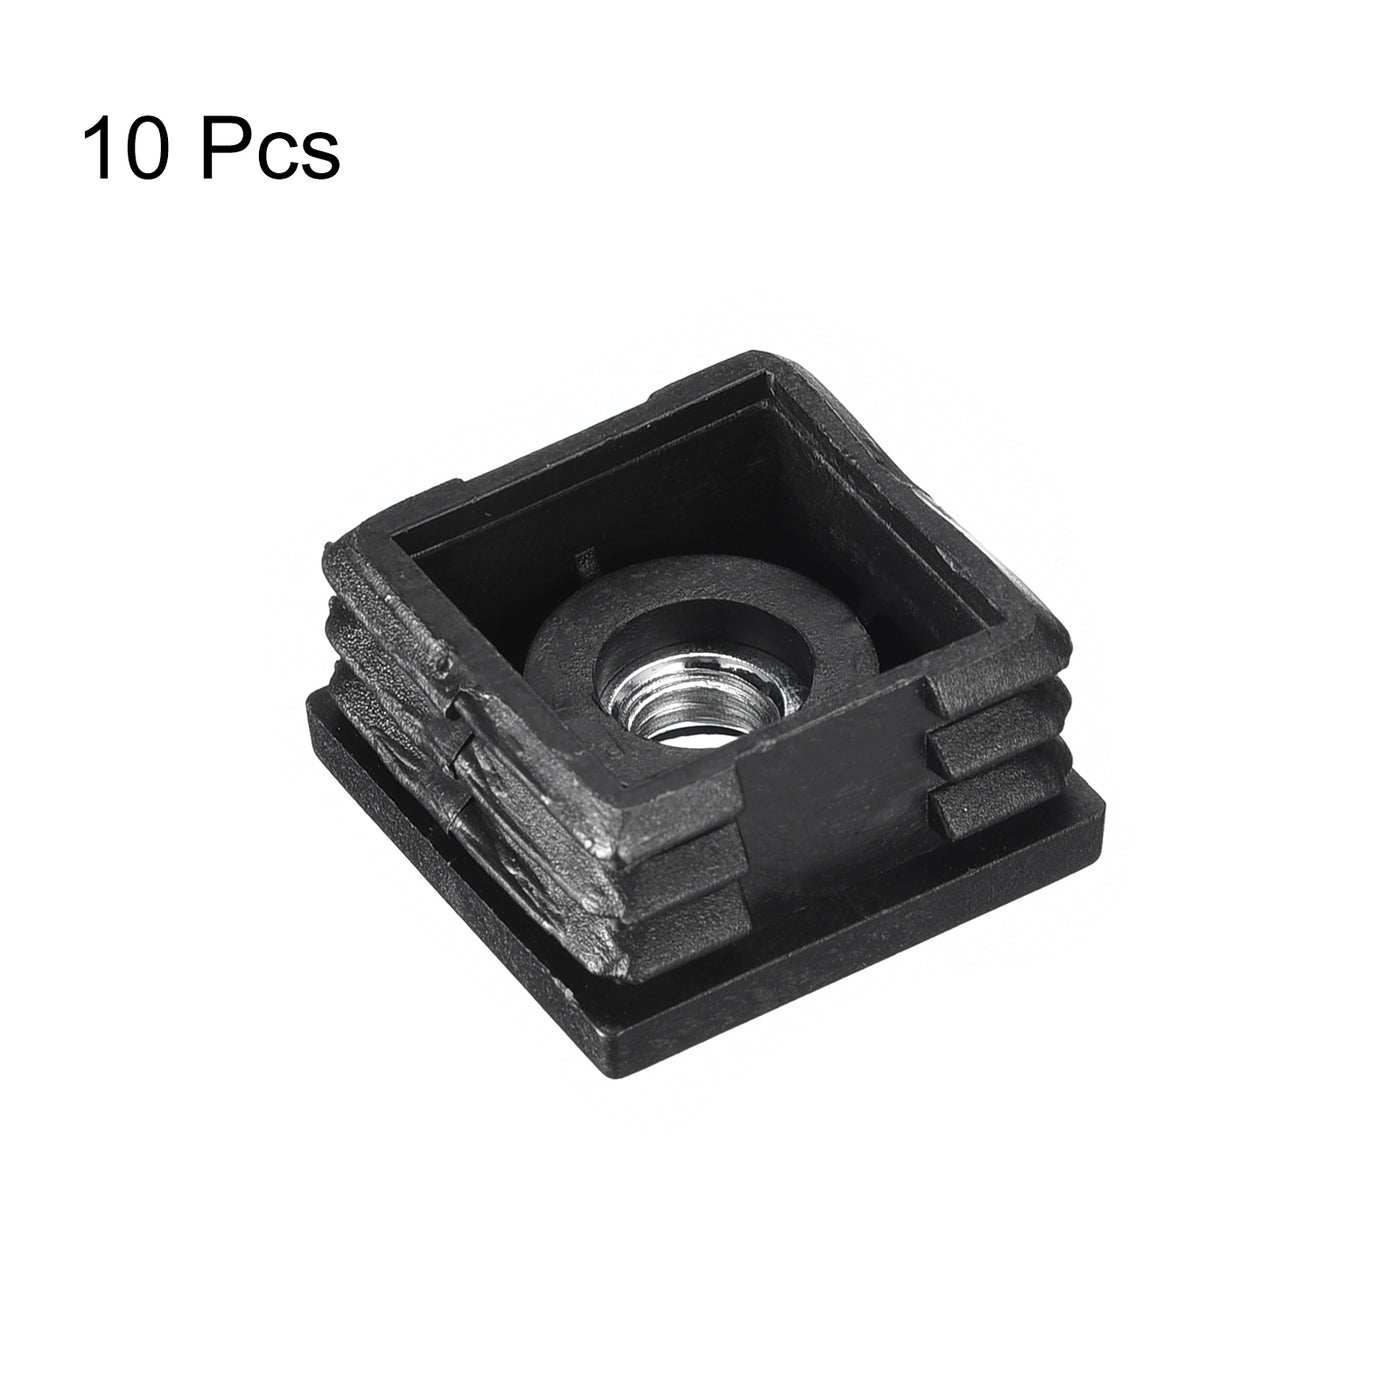 uxcell Uxcell 10Pcs 1.18"x1.18" Caster Insert with Thread, Square M8 Thread for Furniture